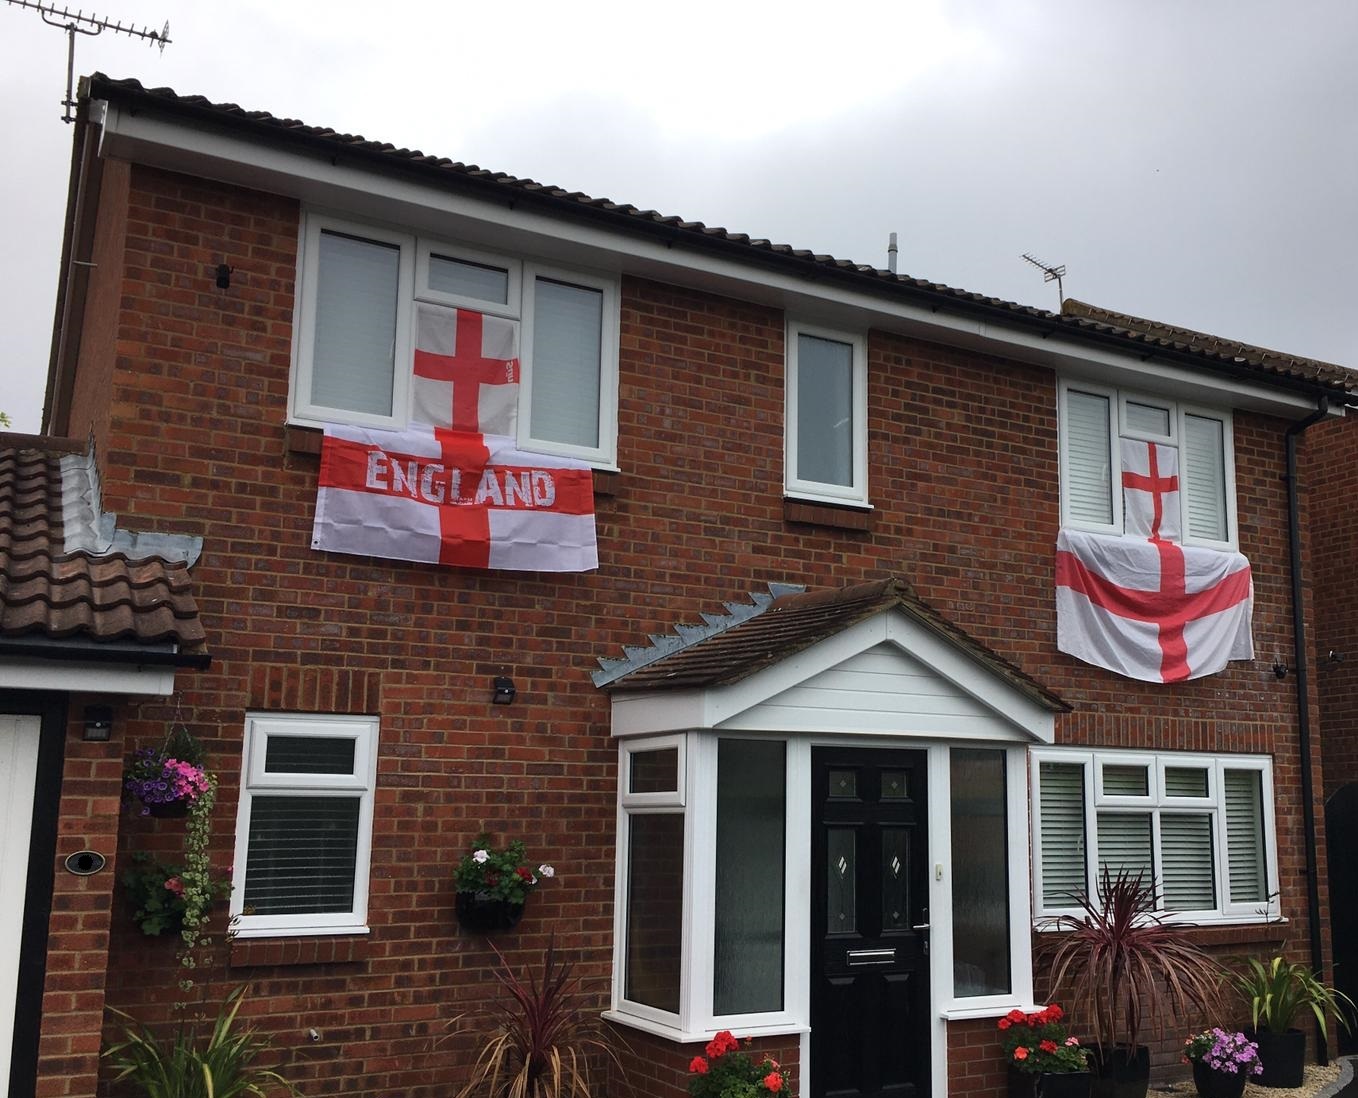 This house in Aylesbury is getting the spirit